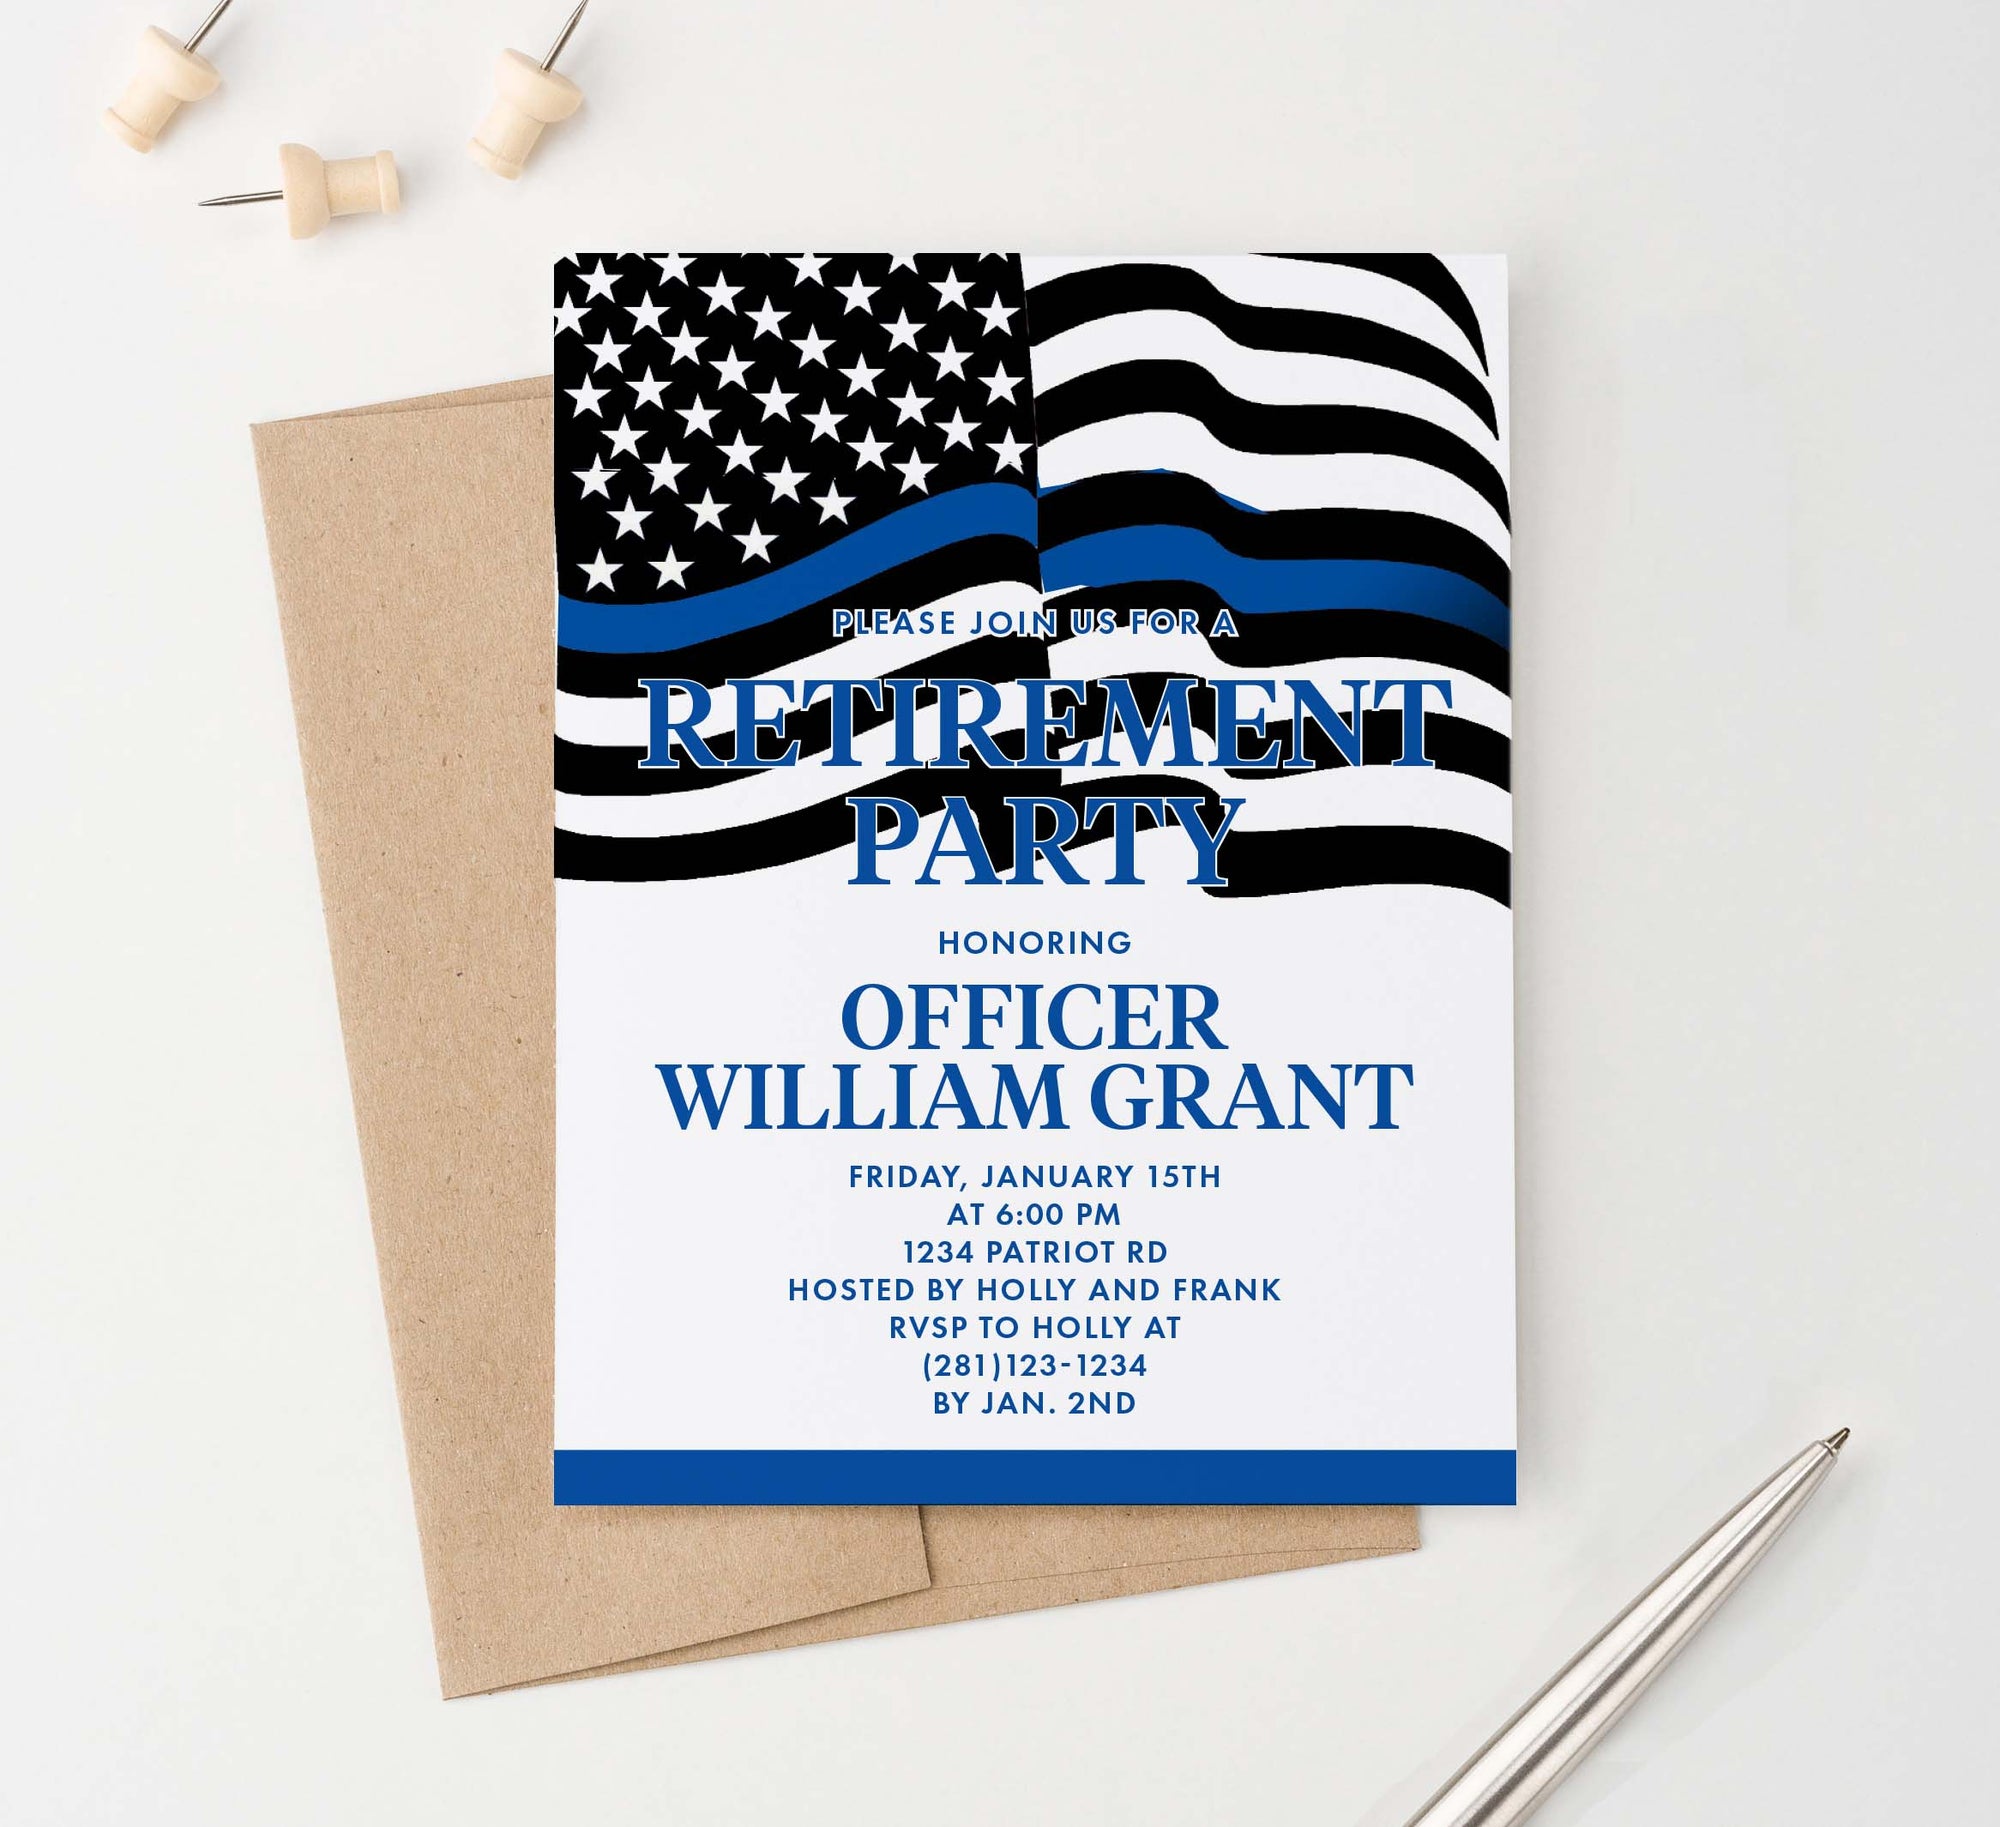 Personalized Police Retirement Party Invitations